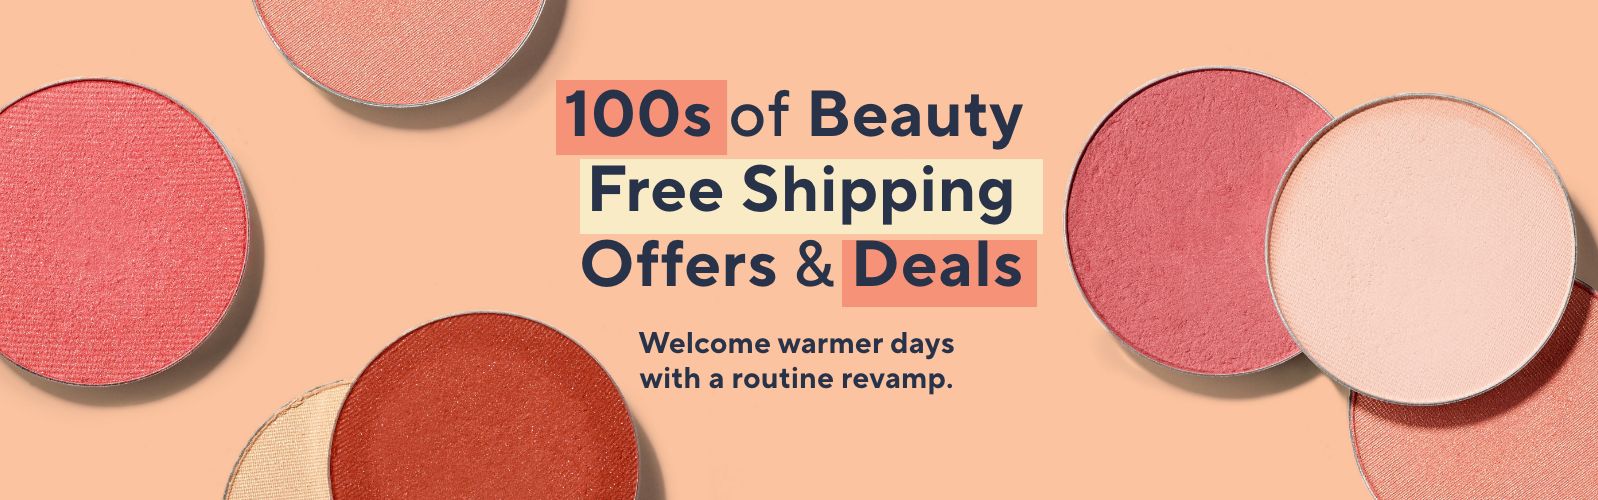 100s of Beauty Free Shipping Offers & Deals - Welcome warmer days with a routine revamp. 